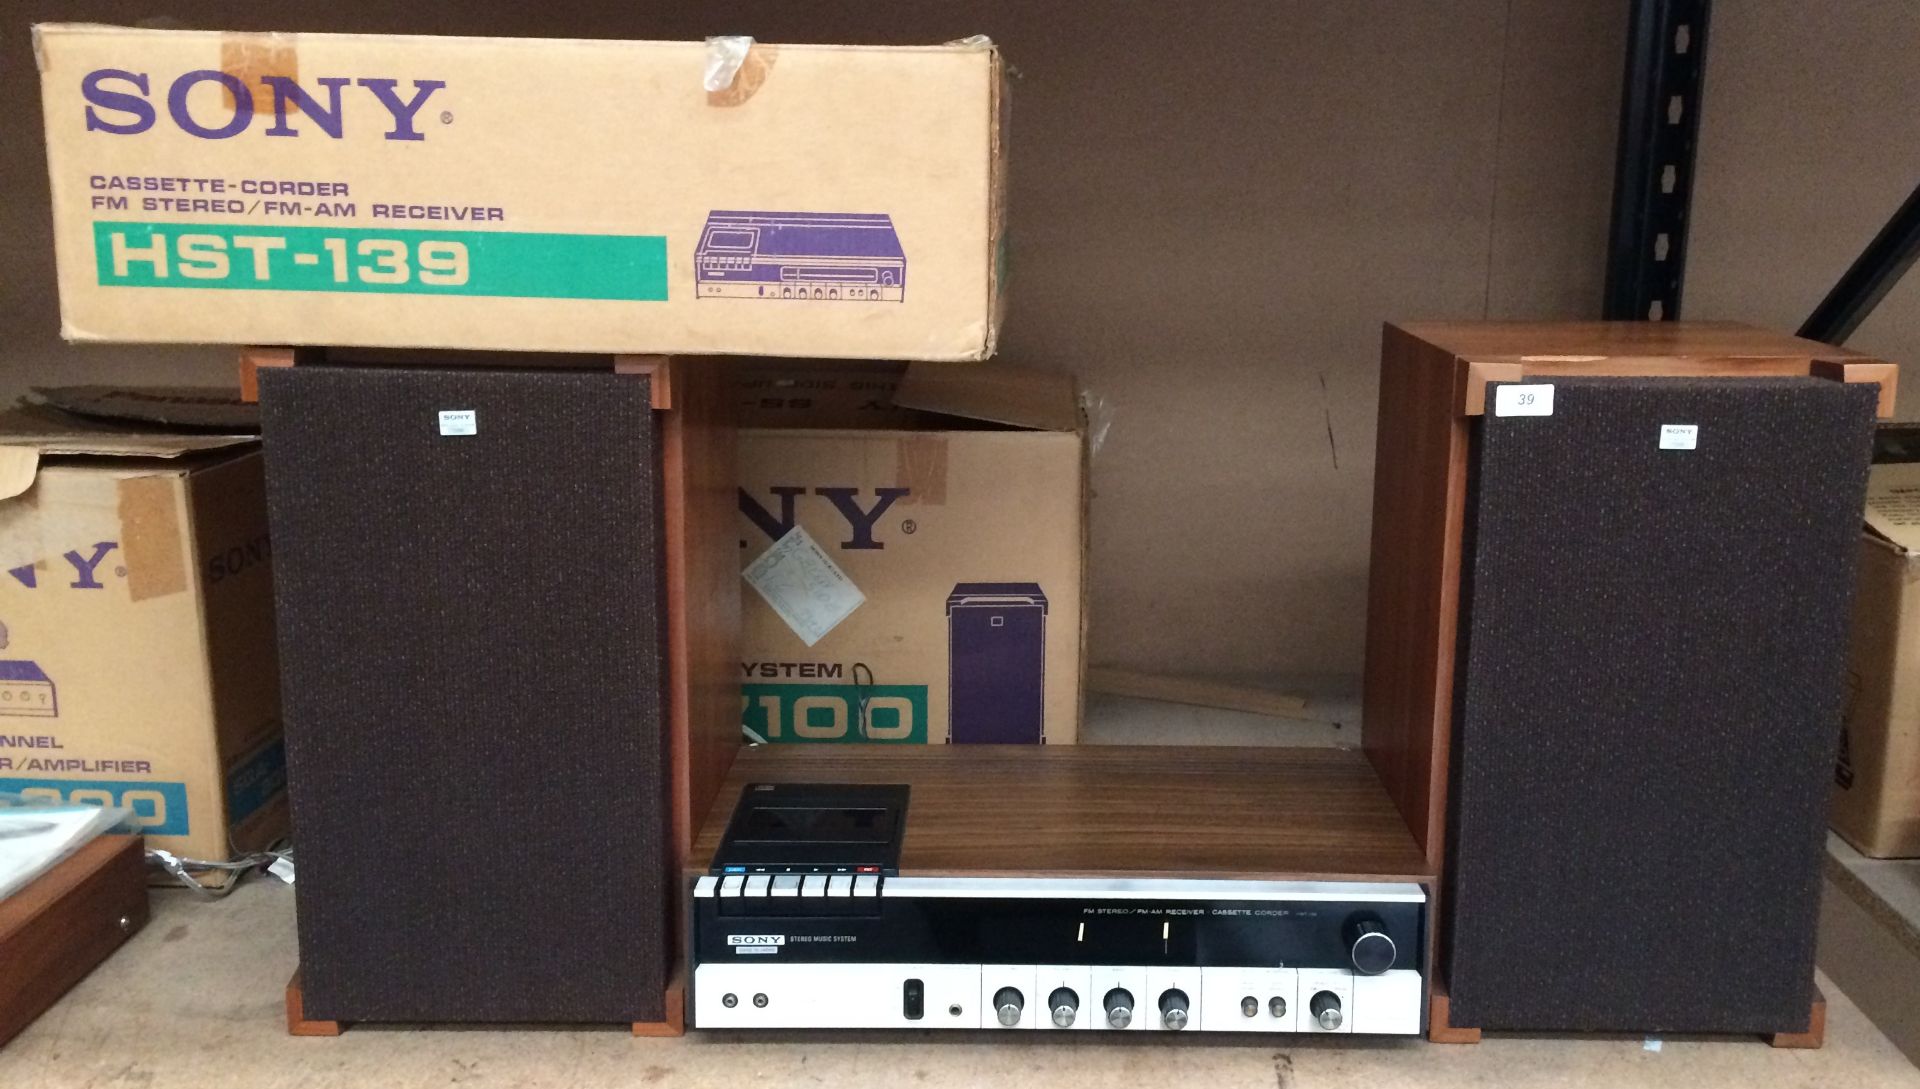 Sony HST-139 stereo music system, togeth